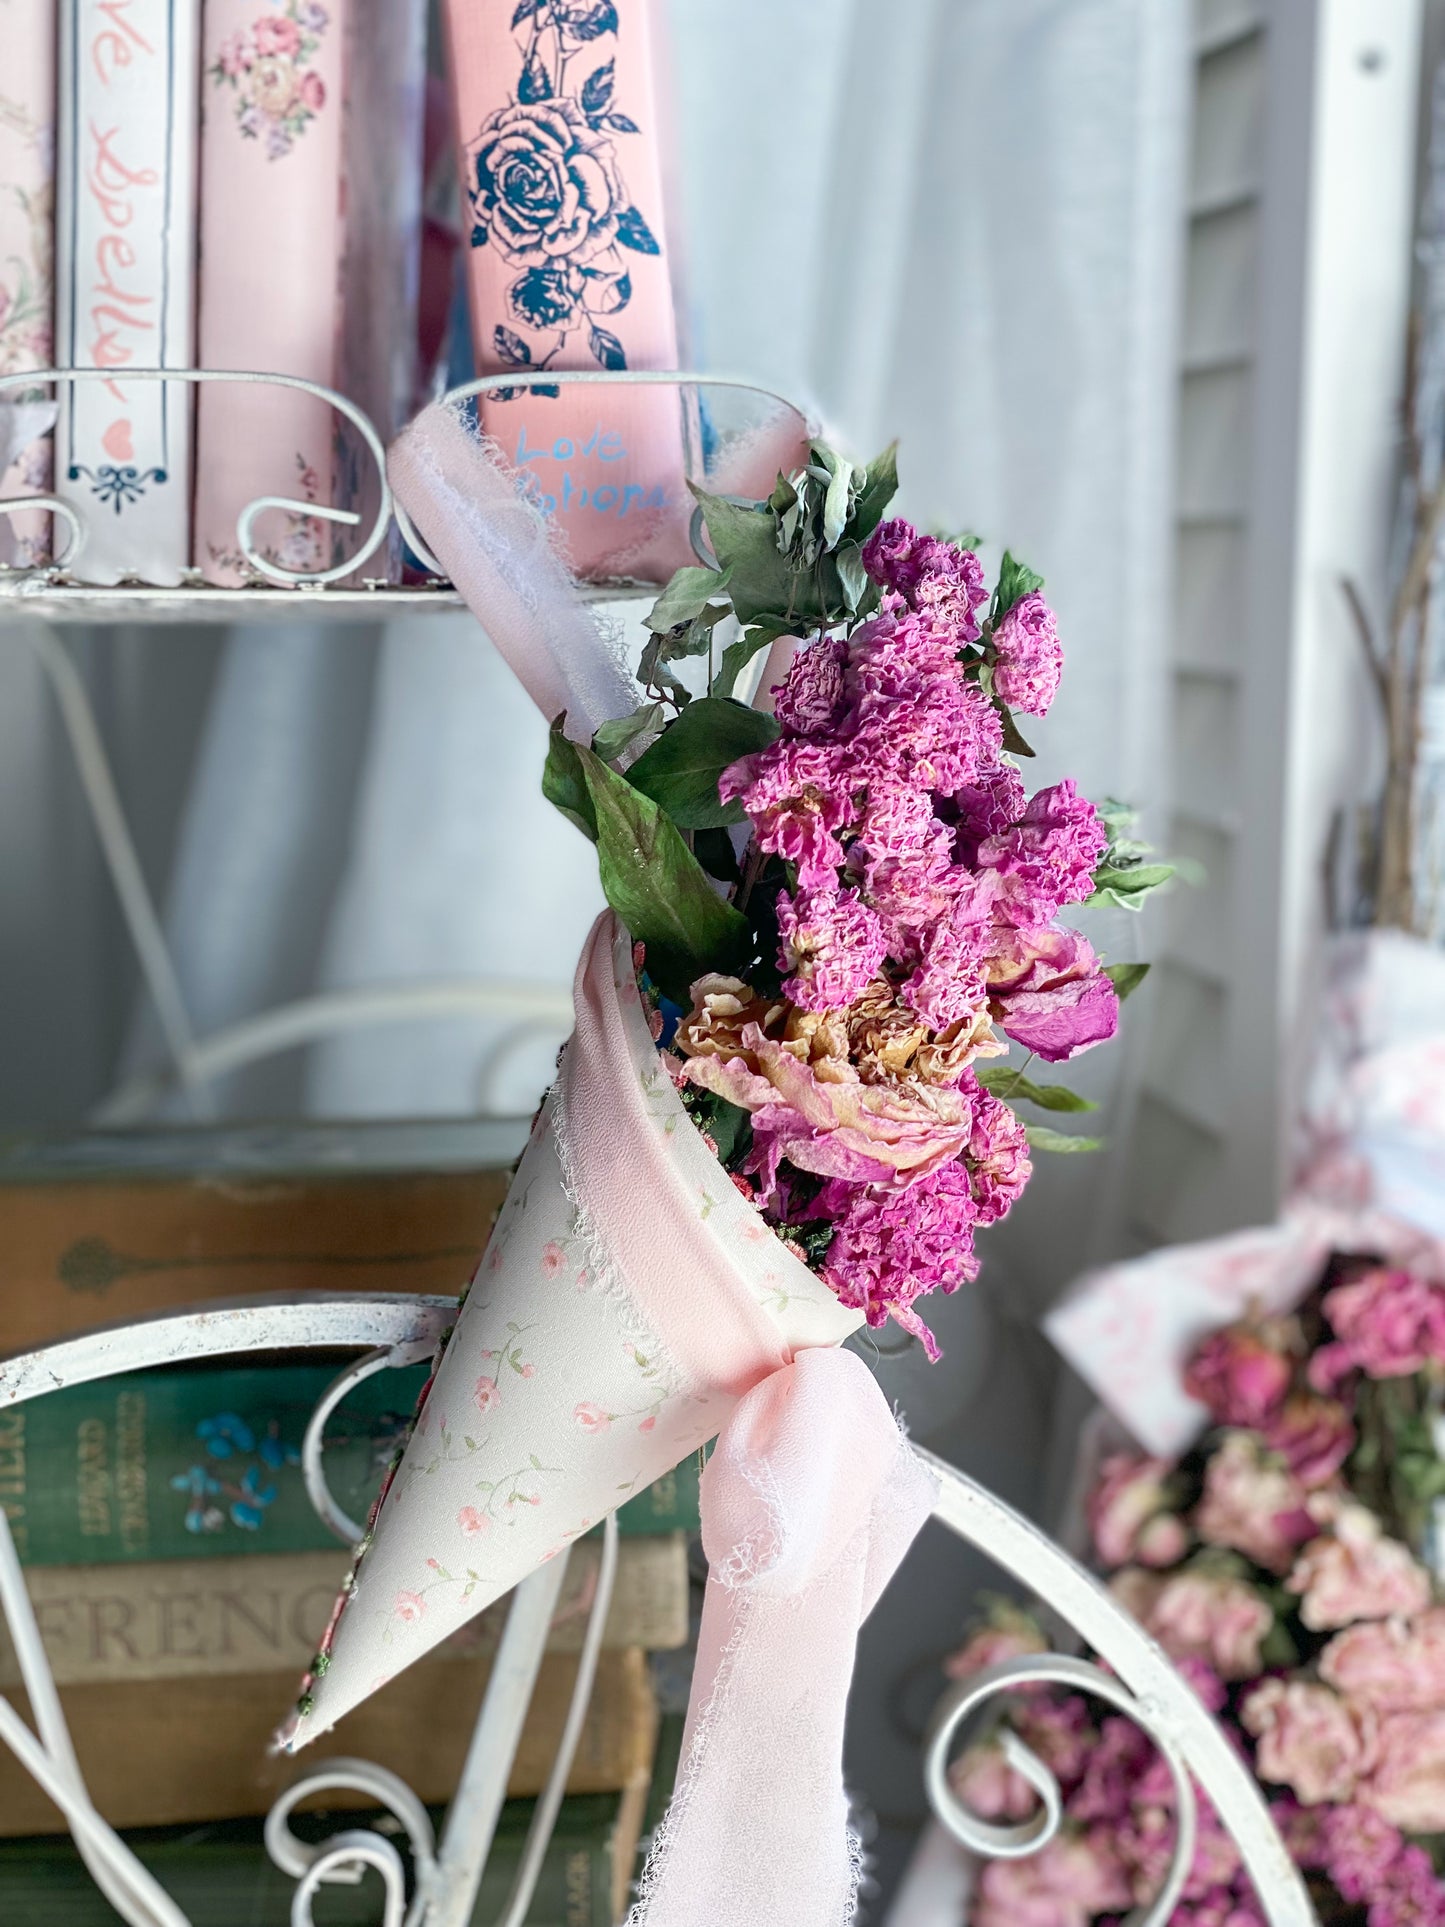 Bespoke Floral Cone made from Vintage Wallpaper